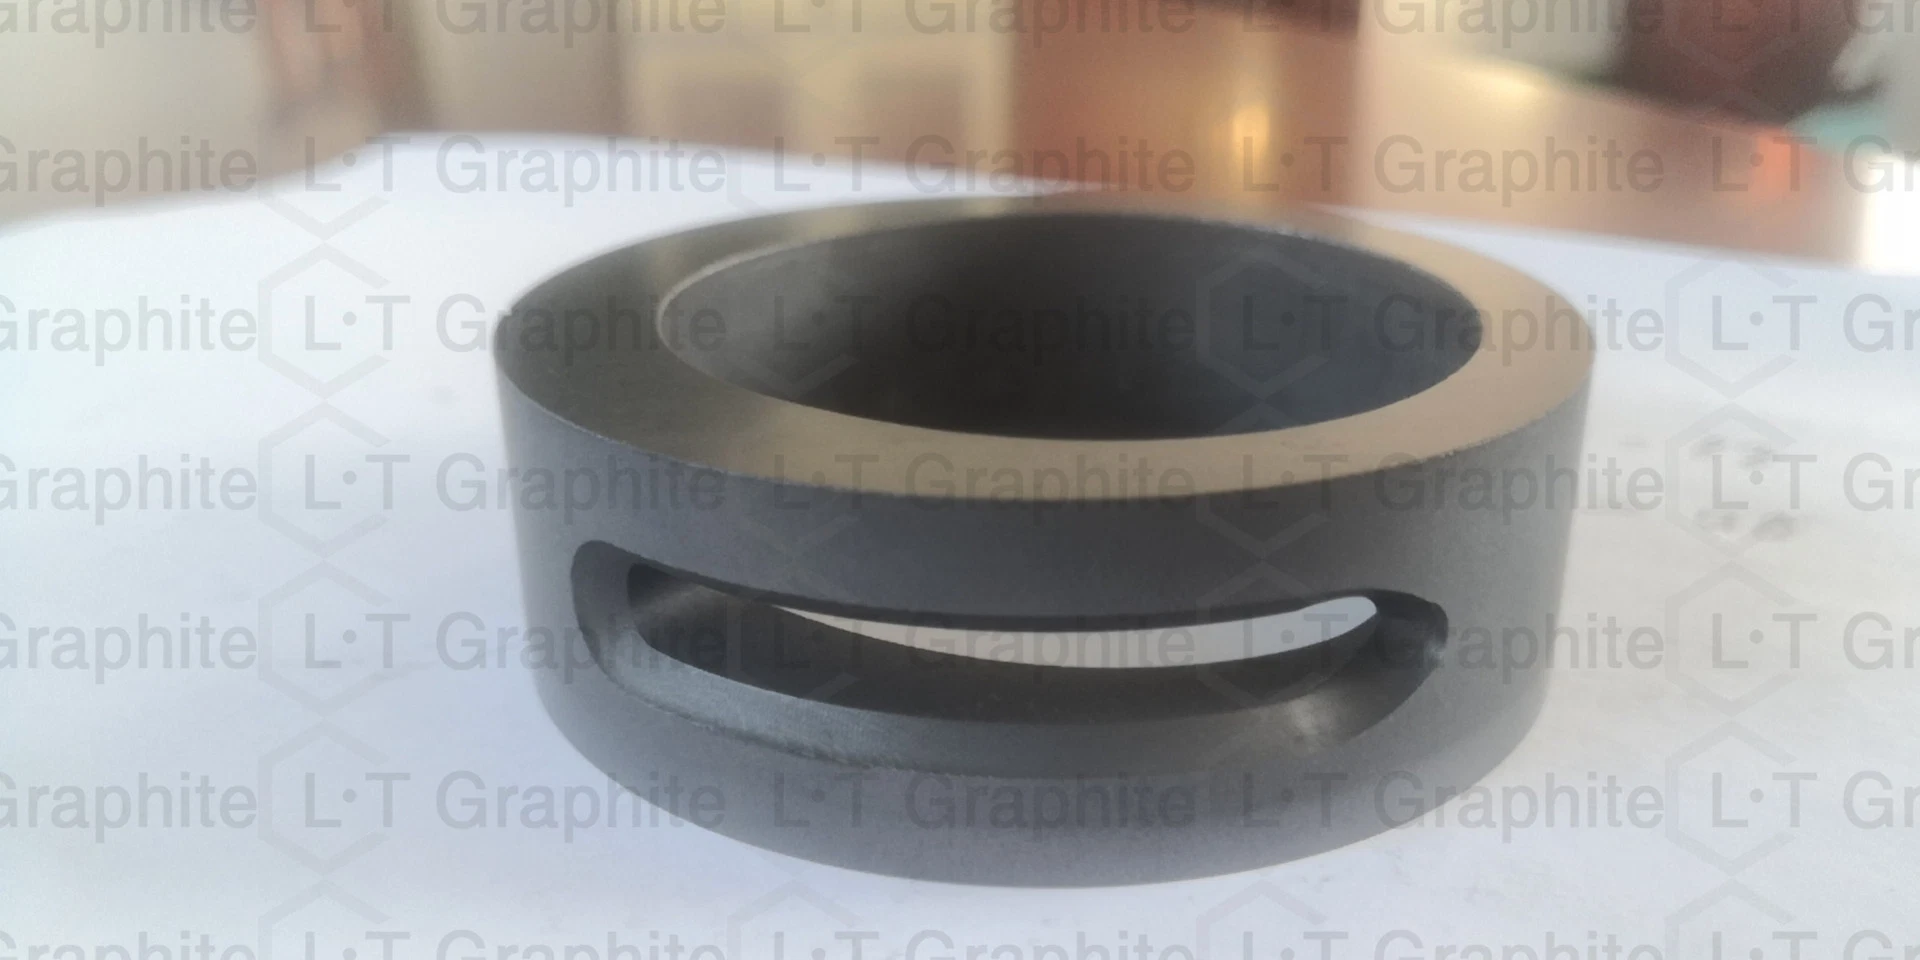 Oxidation Resistant Resistant Specialty Resin Graphite Eccentric Rings